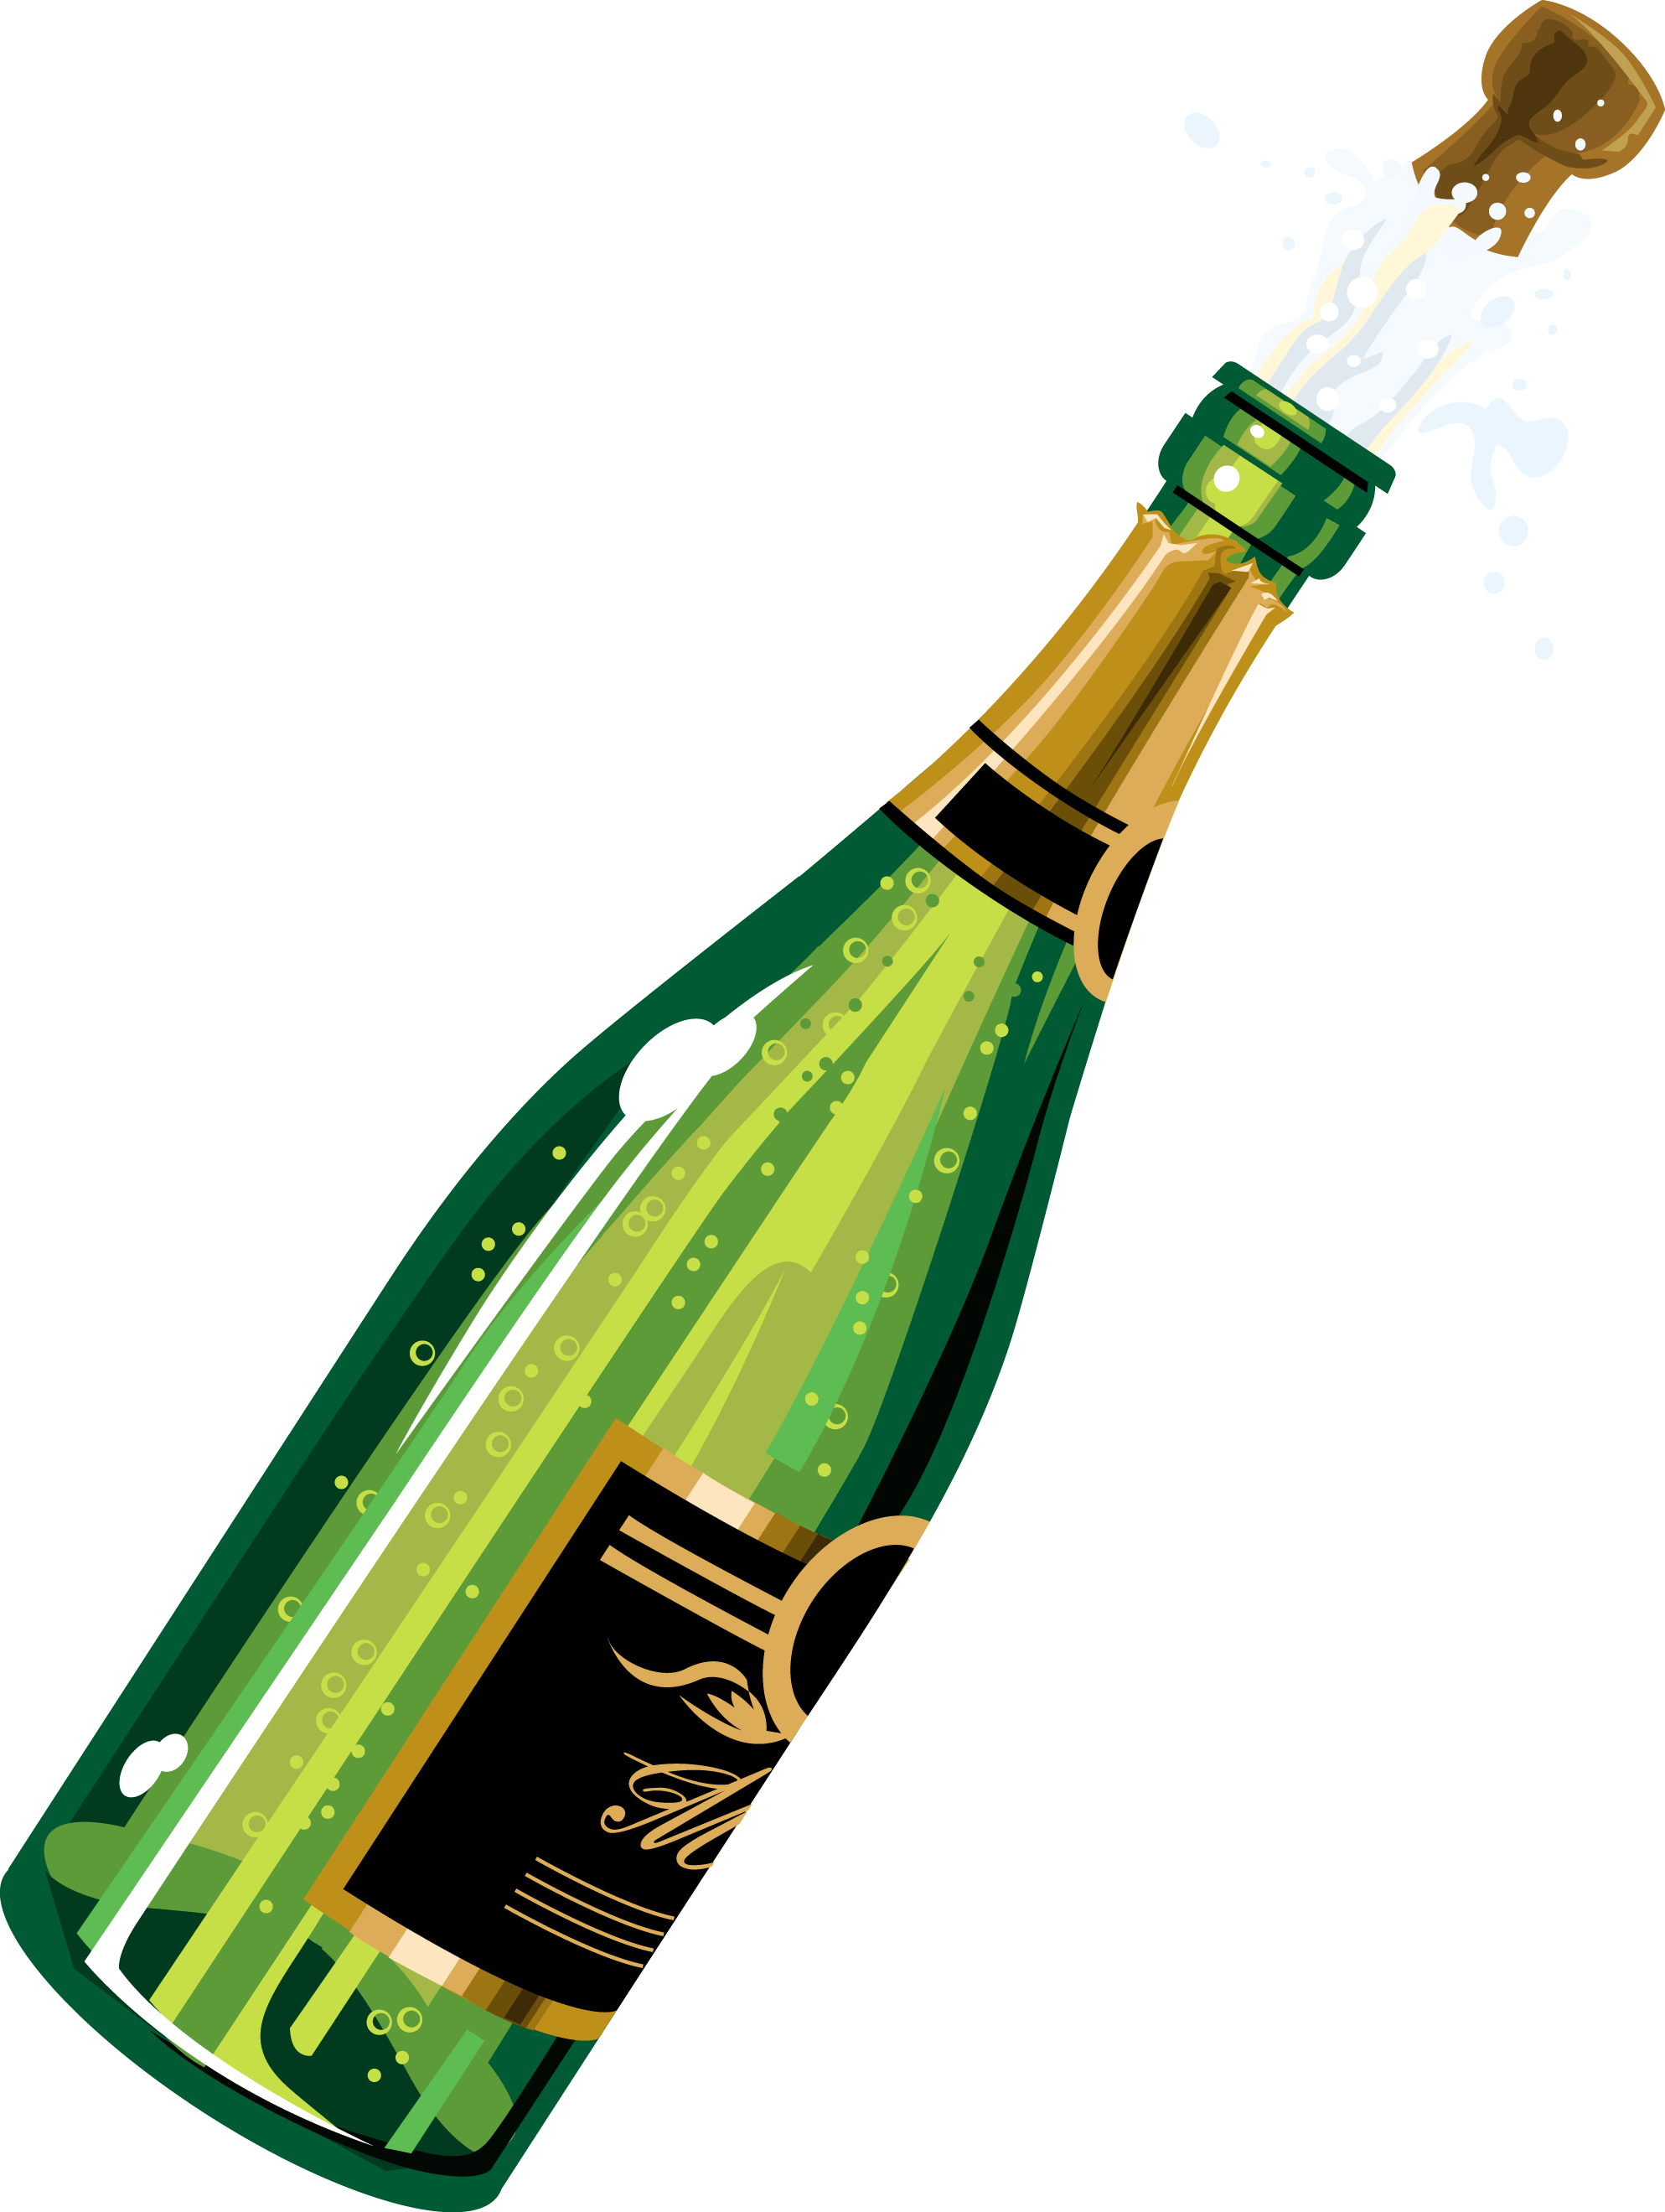 champaign clipart animated